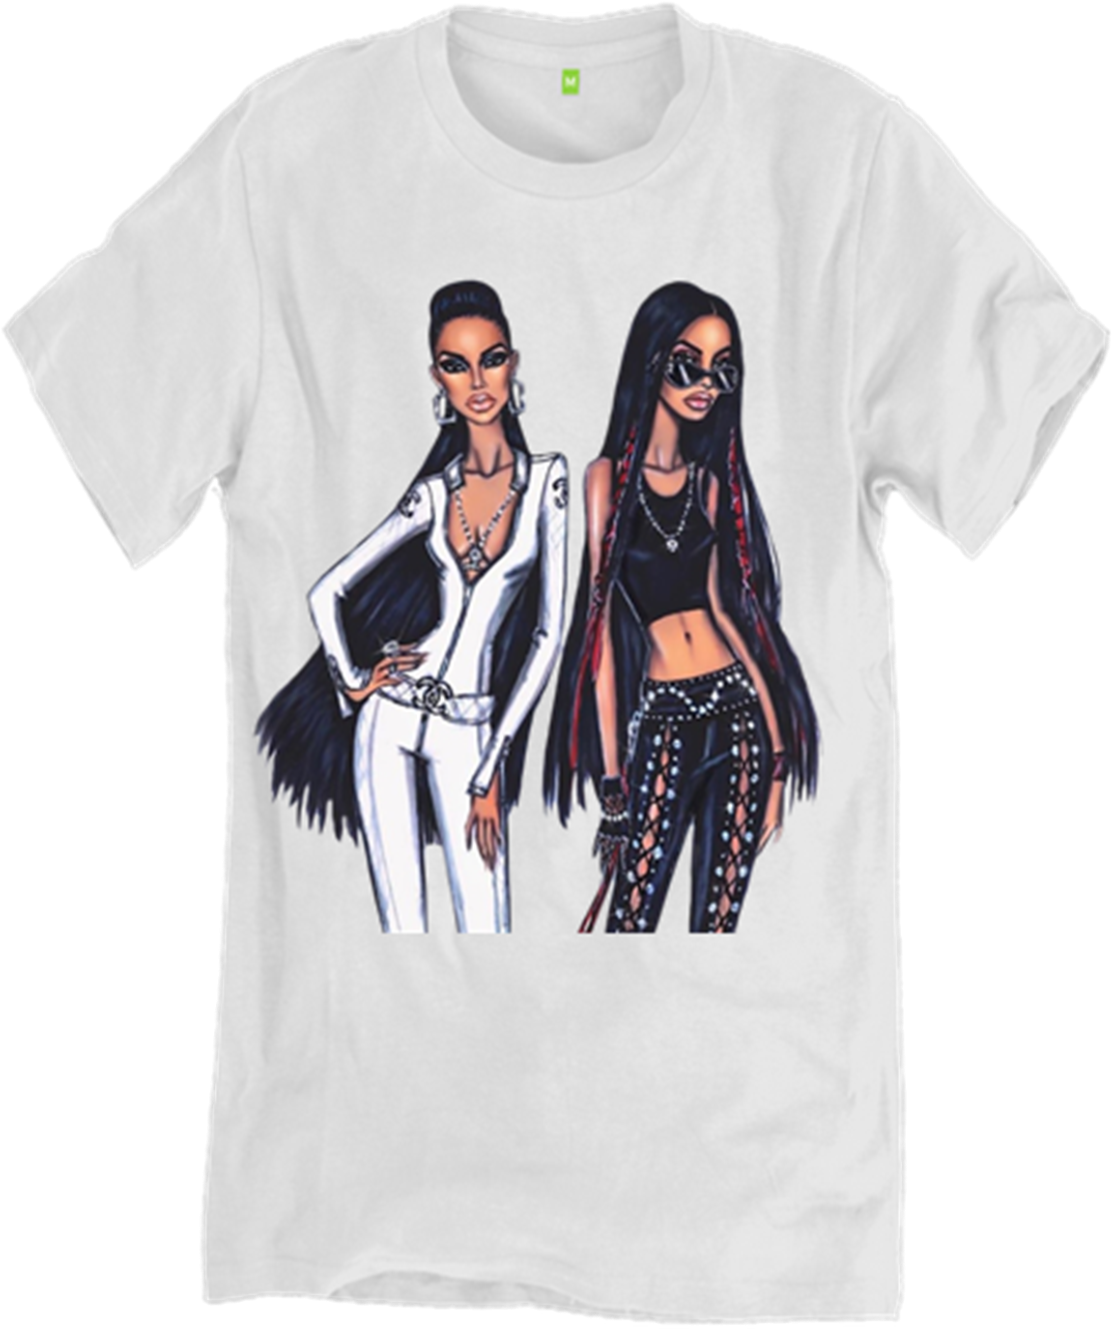 Aaliyah Hiphop Soul Queen Fashion Vogue Custom Shirt - Aaliyah More Than A Woman Outfit, Hd Png Download